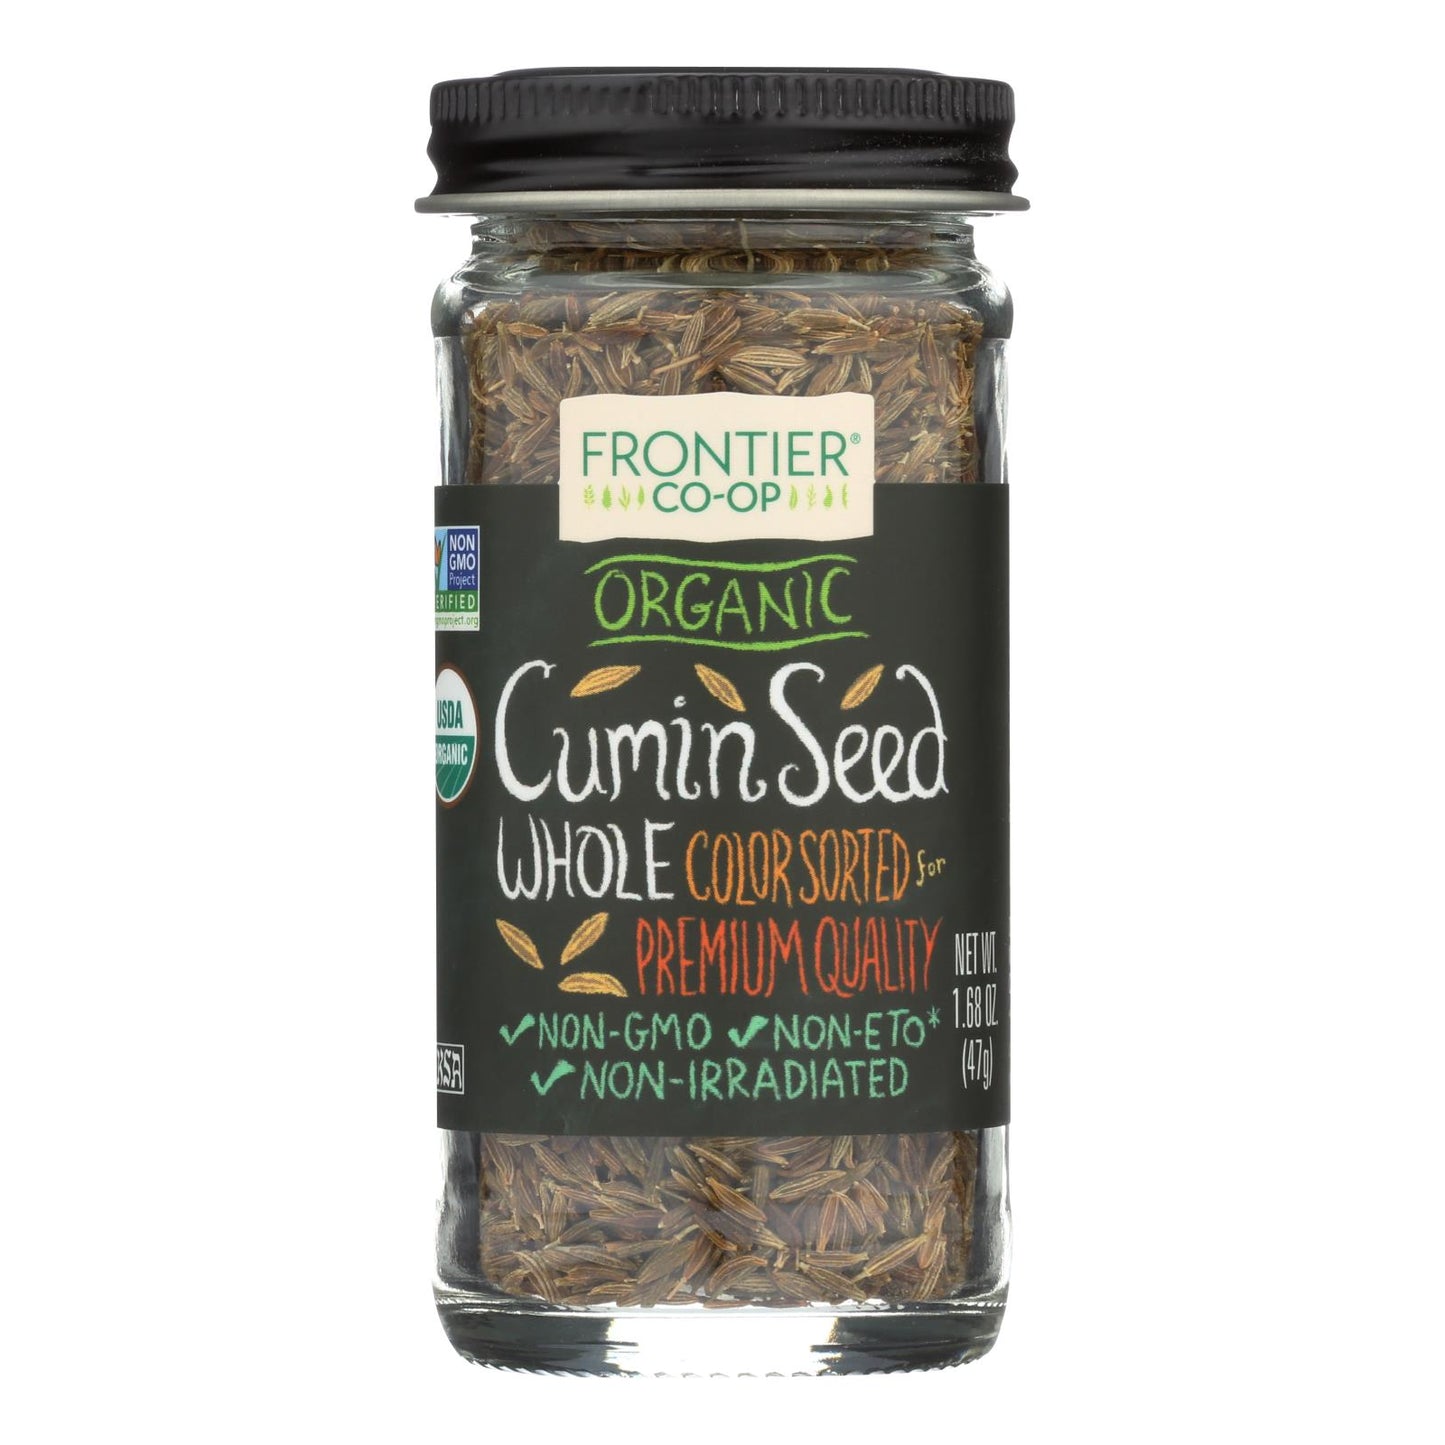 Organic Whole Cumin Seed | Frontier Herb